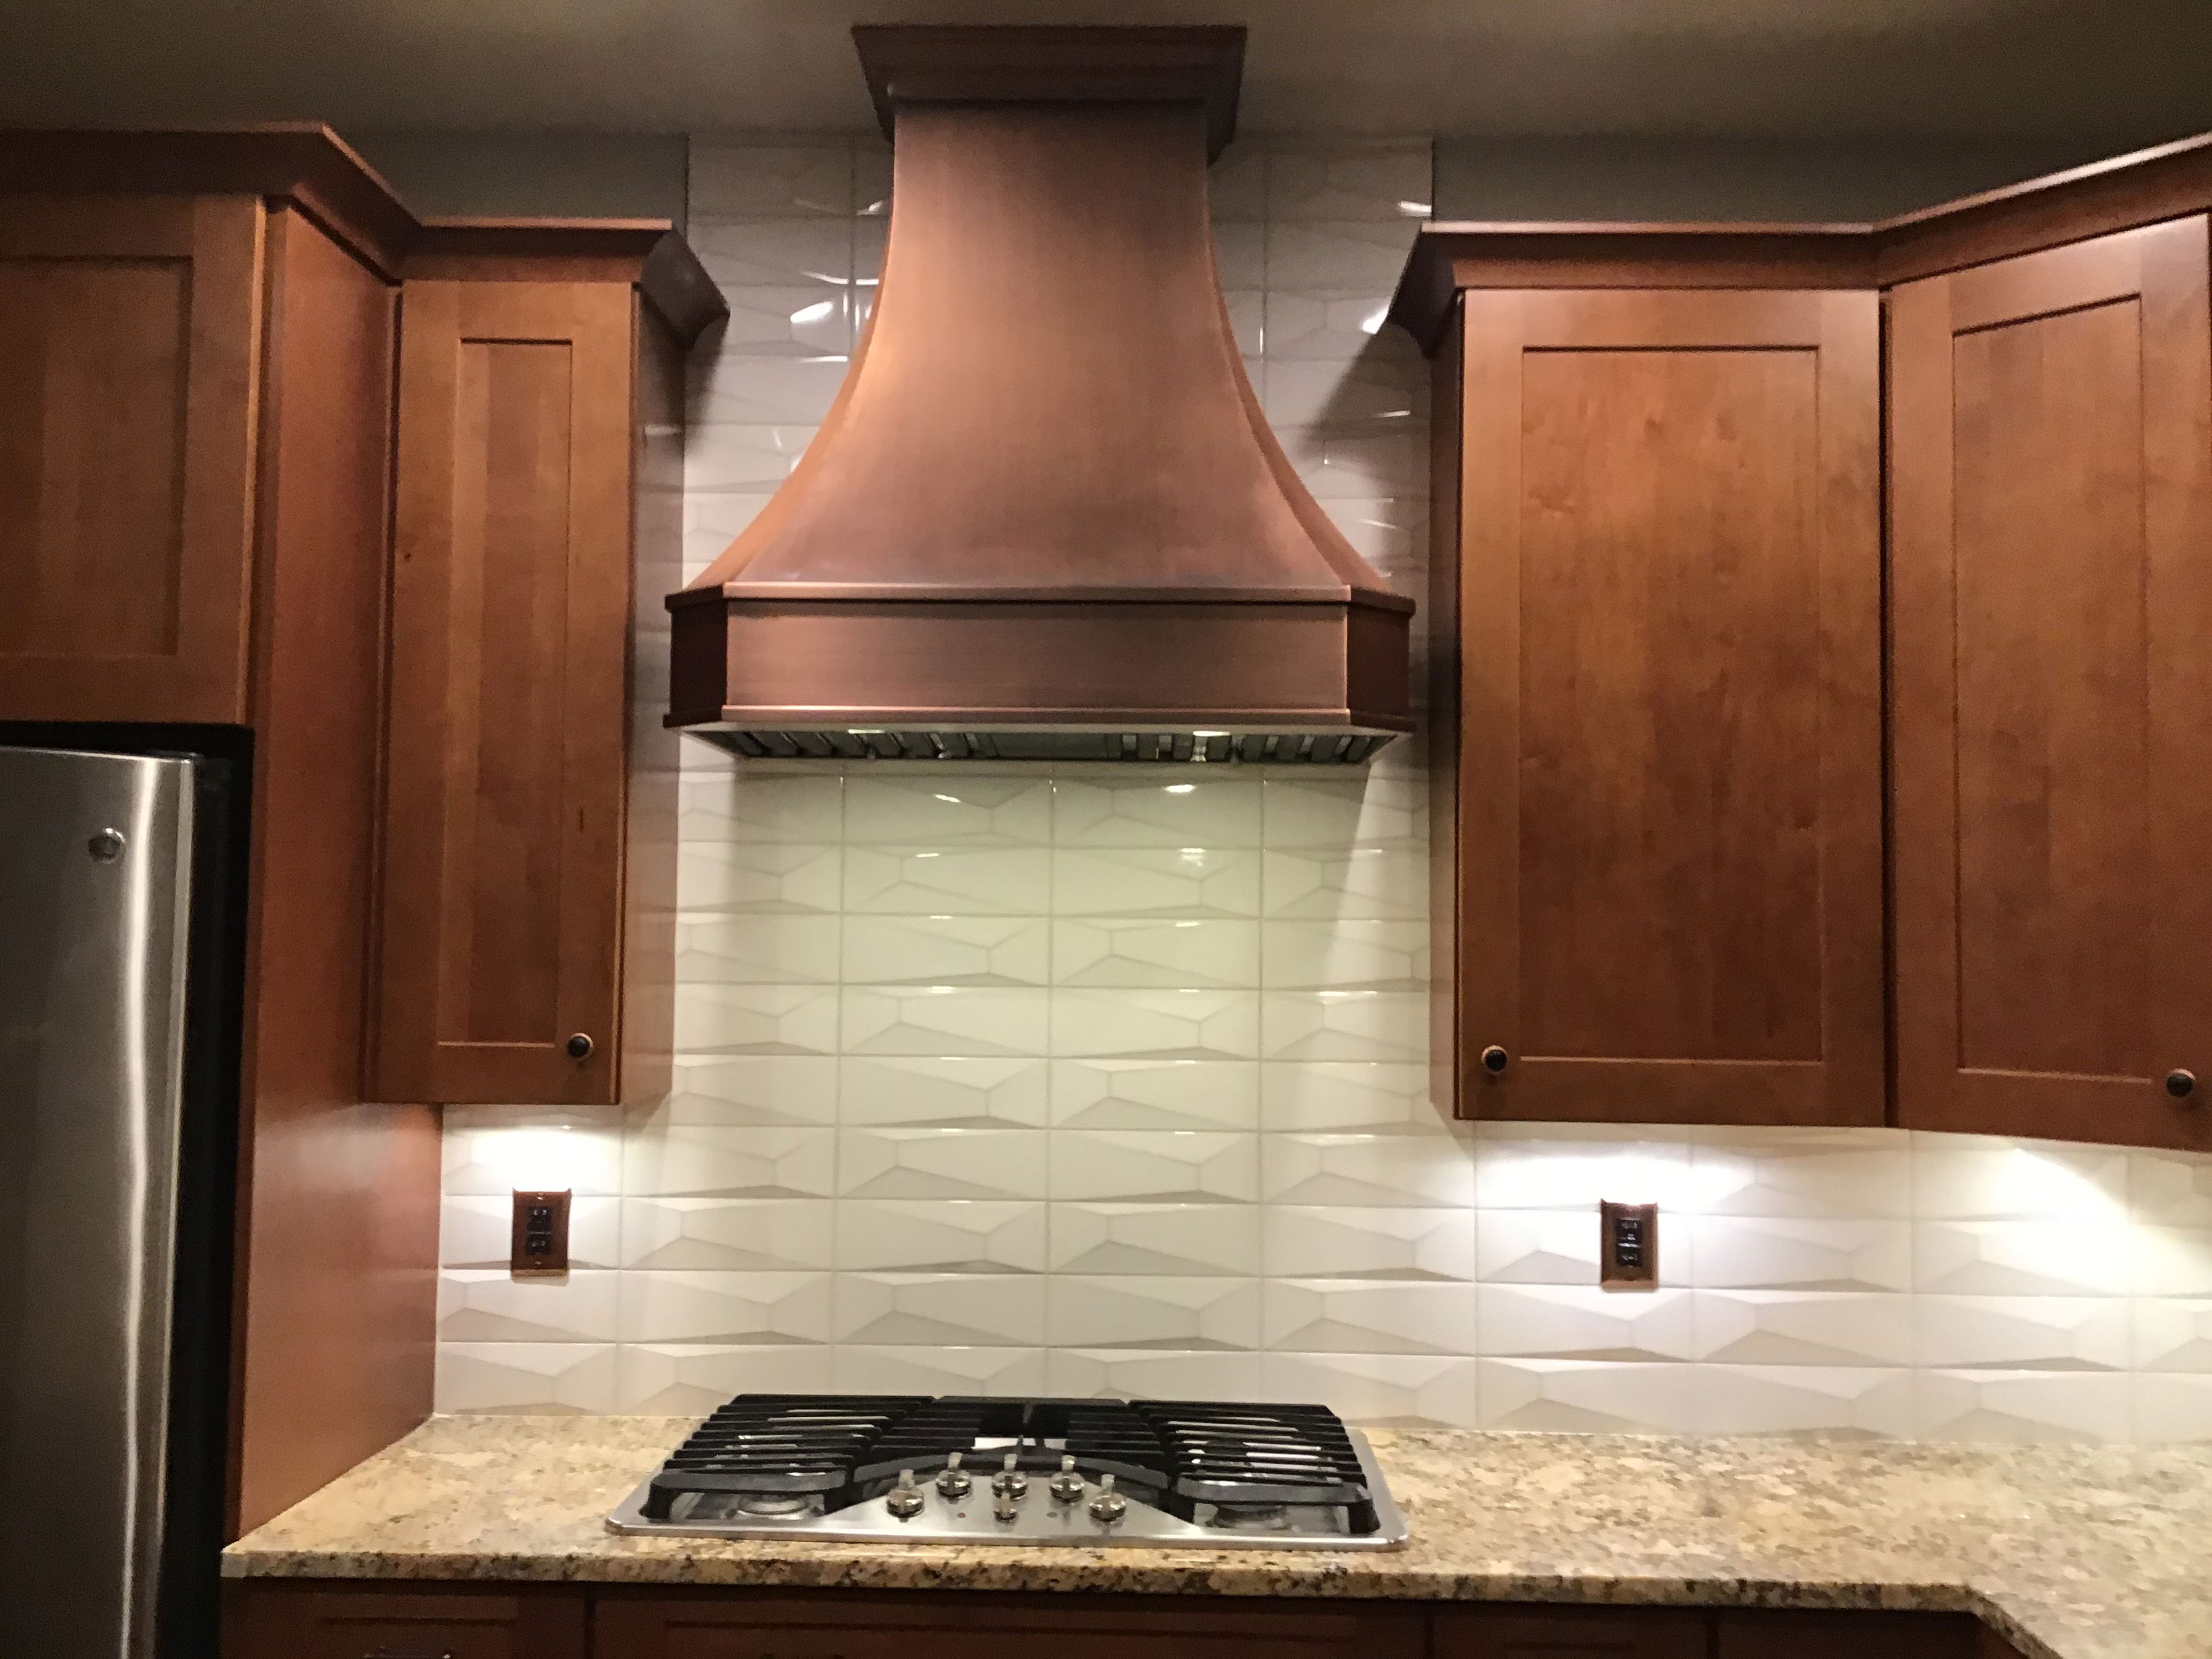 A copper range hood with a smooth flange shape World CopperSmith